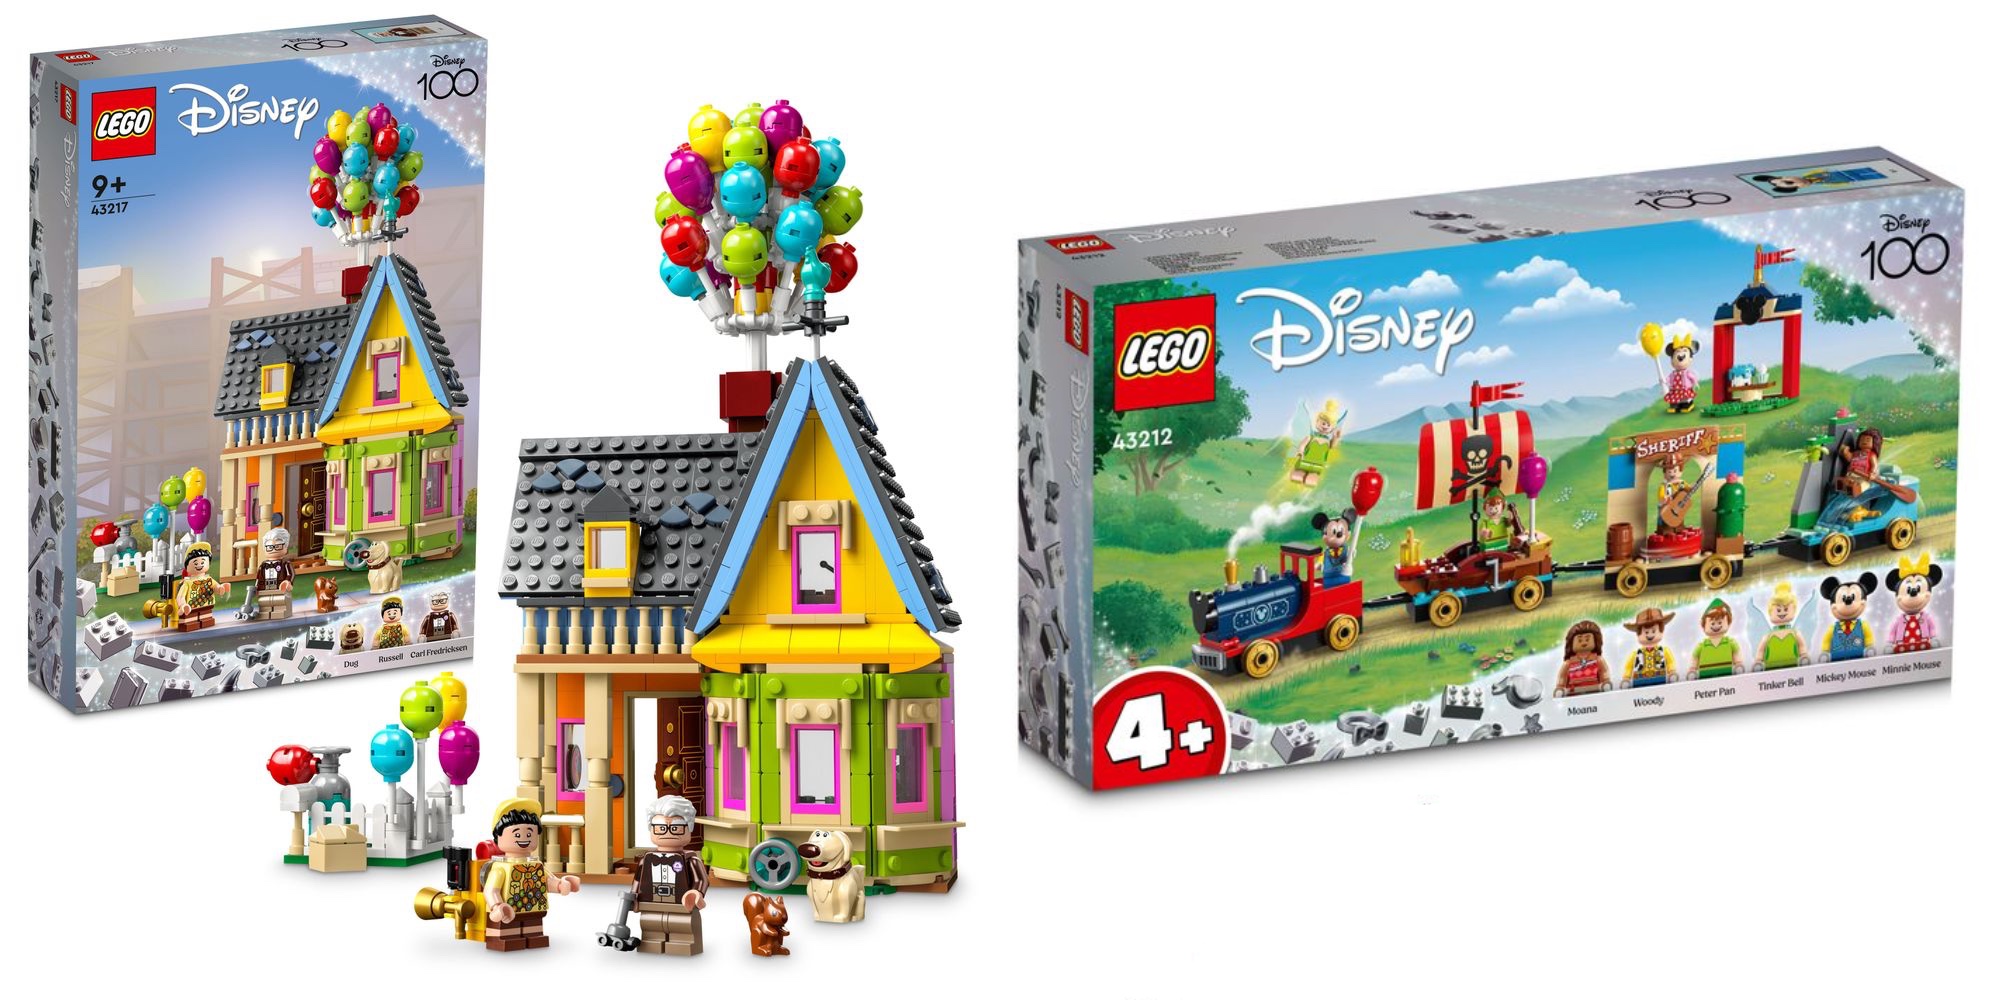 LEGO Up House revealed with other 100th Disney sets